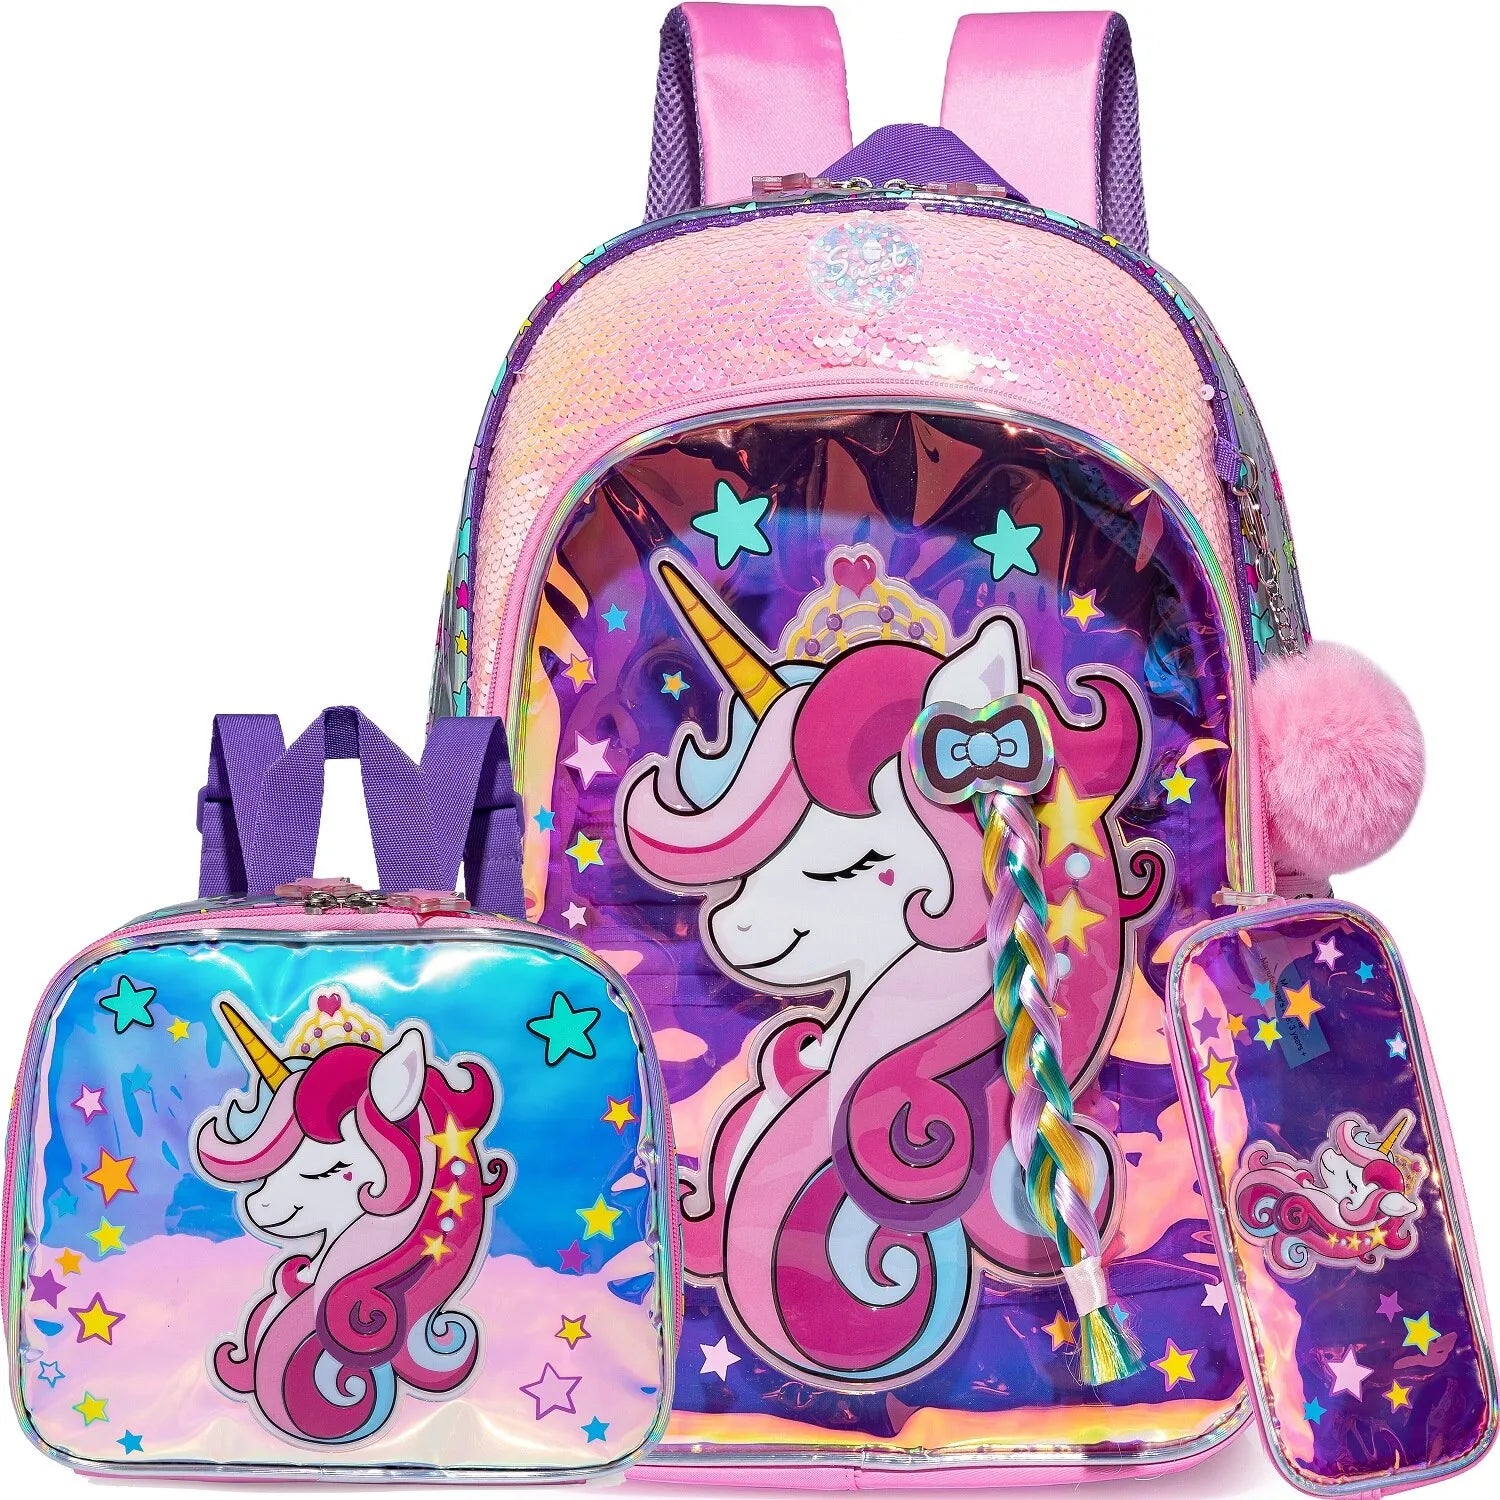 Magical Unicorn Fantasy Backpack and Lunch Box Set for Girls